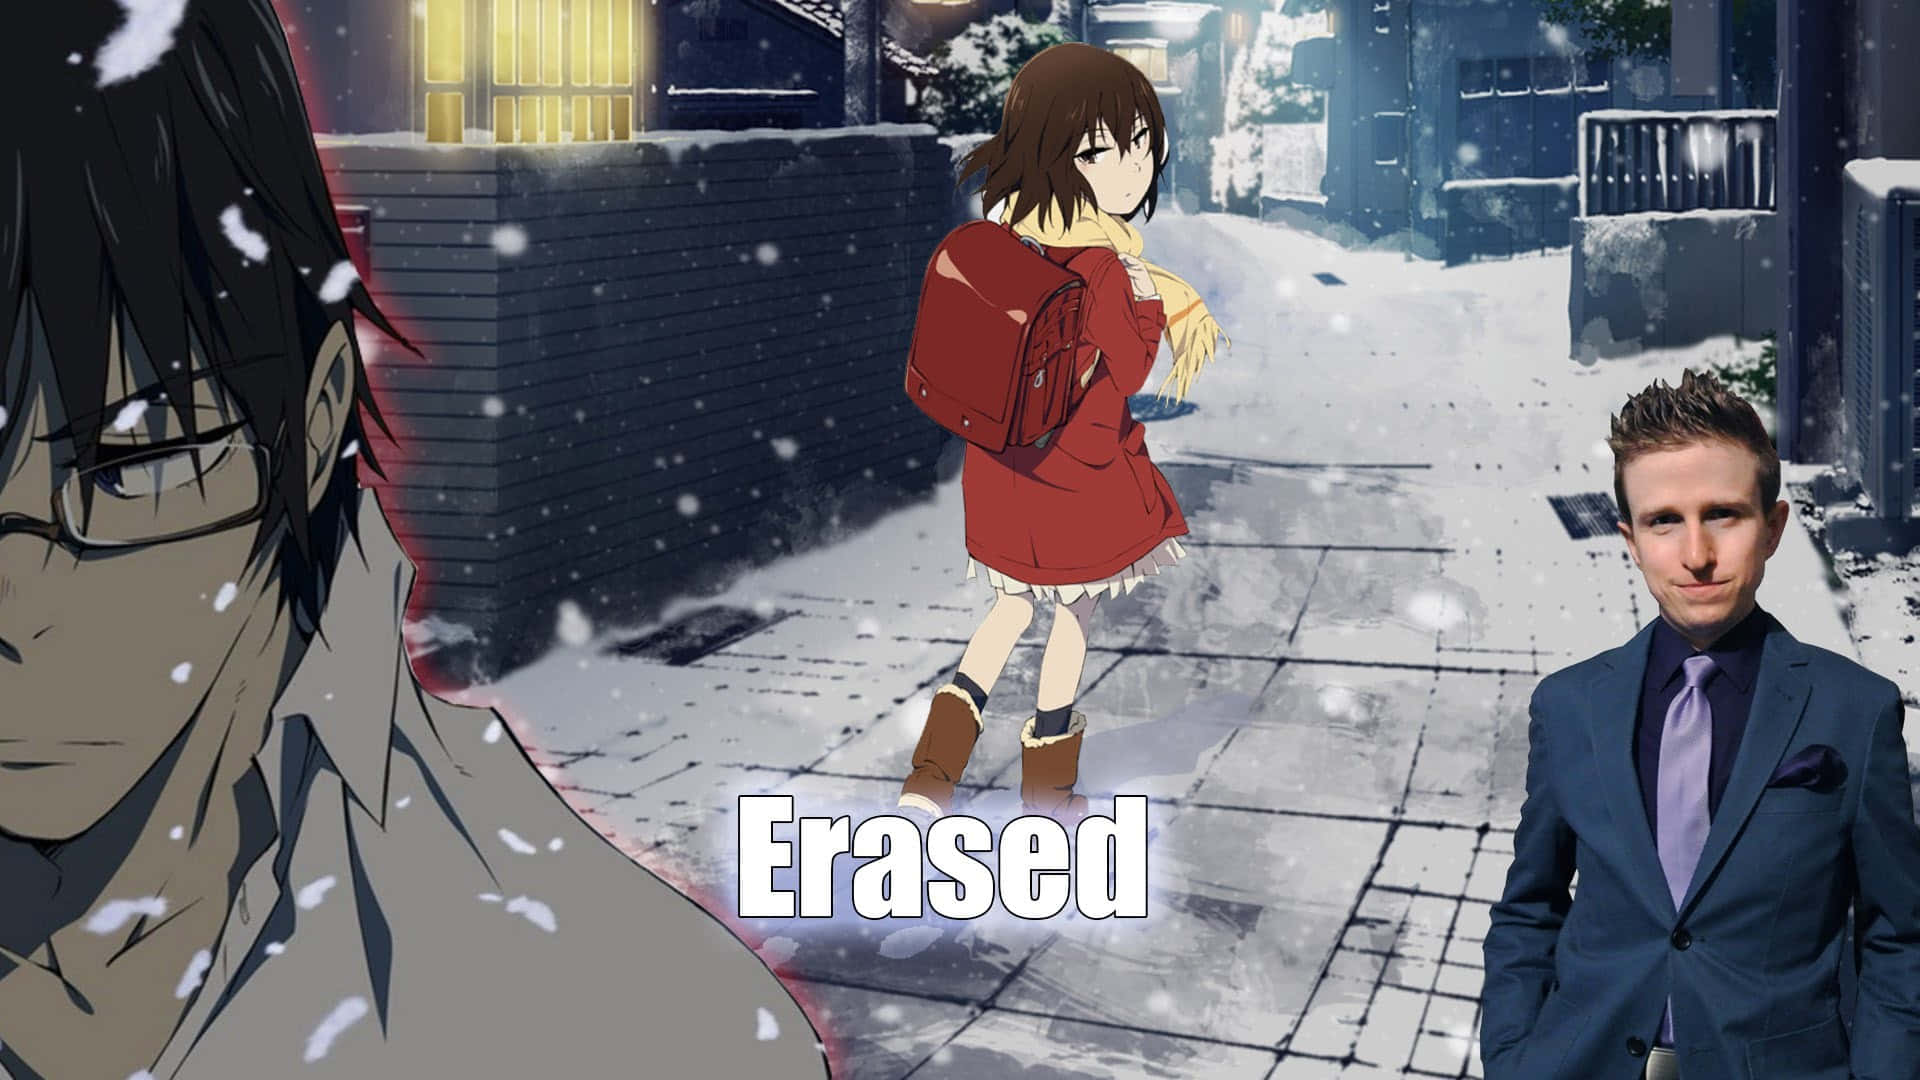 Exciting moments from Erased - A stellar Anime Series Wallpaper